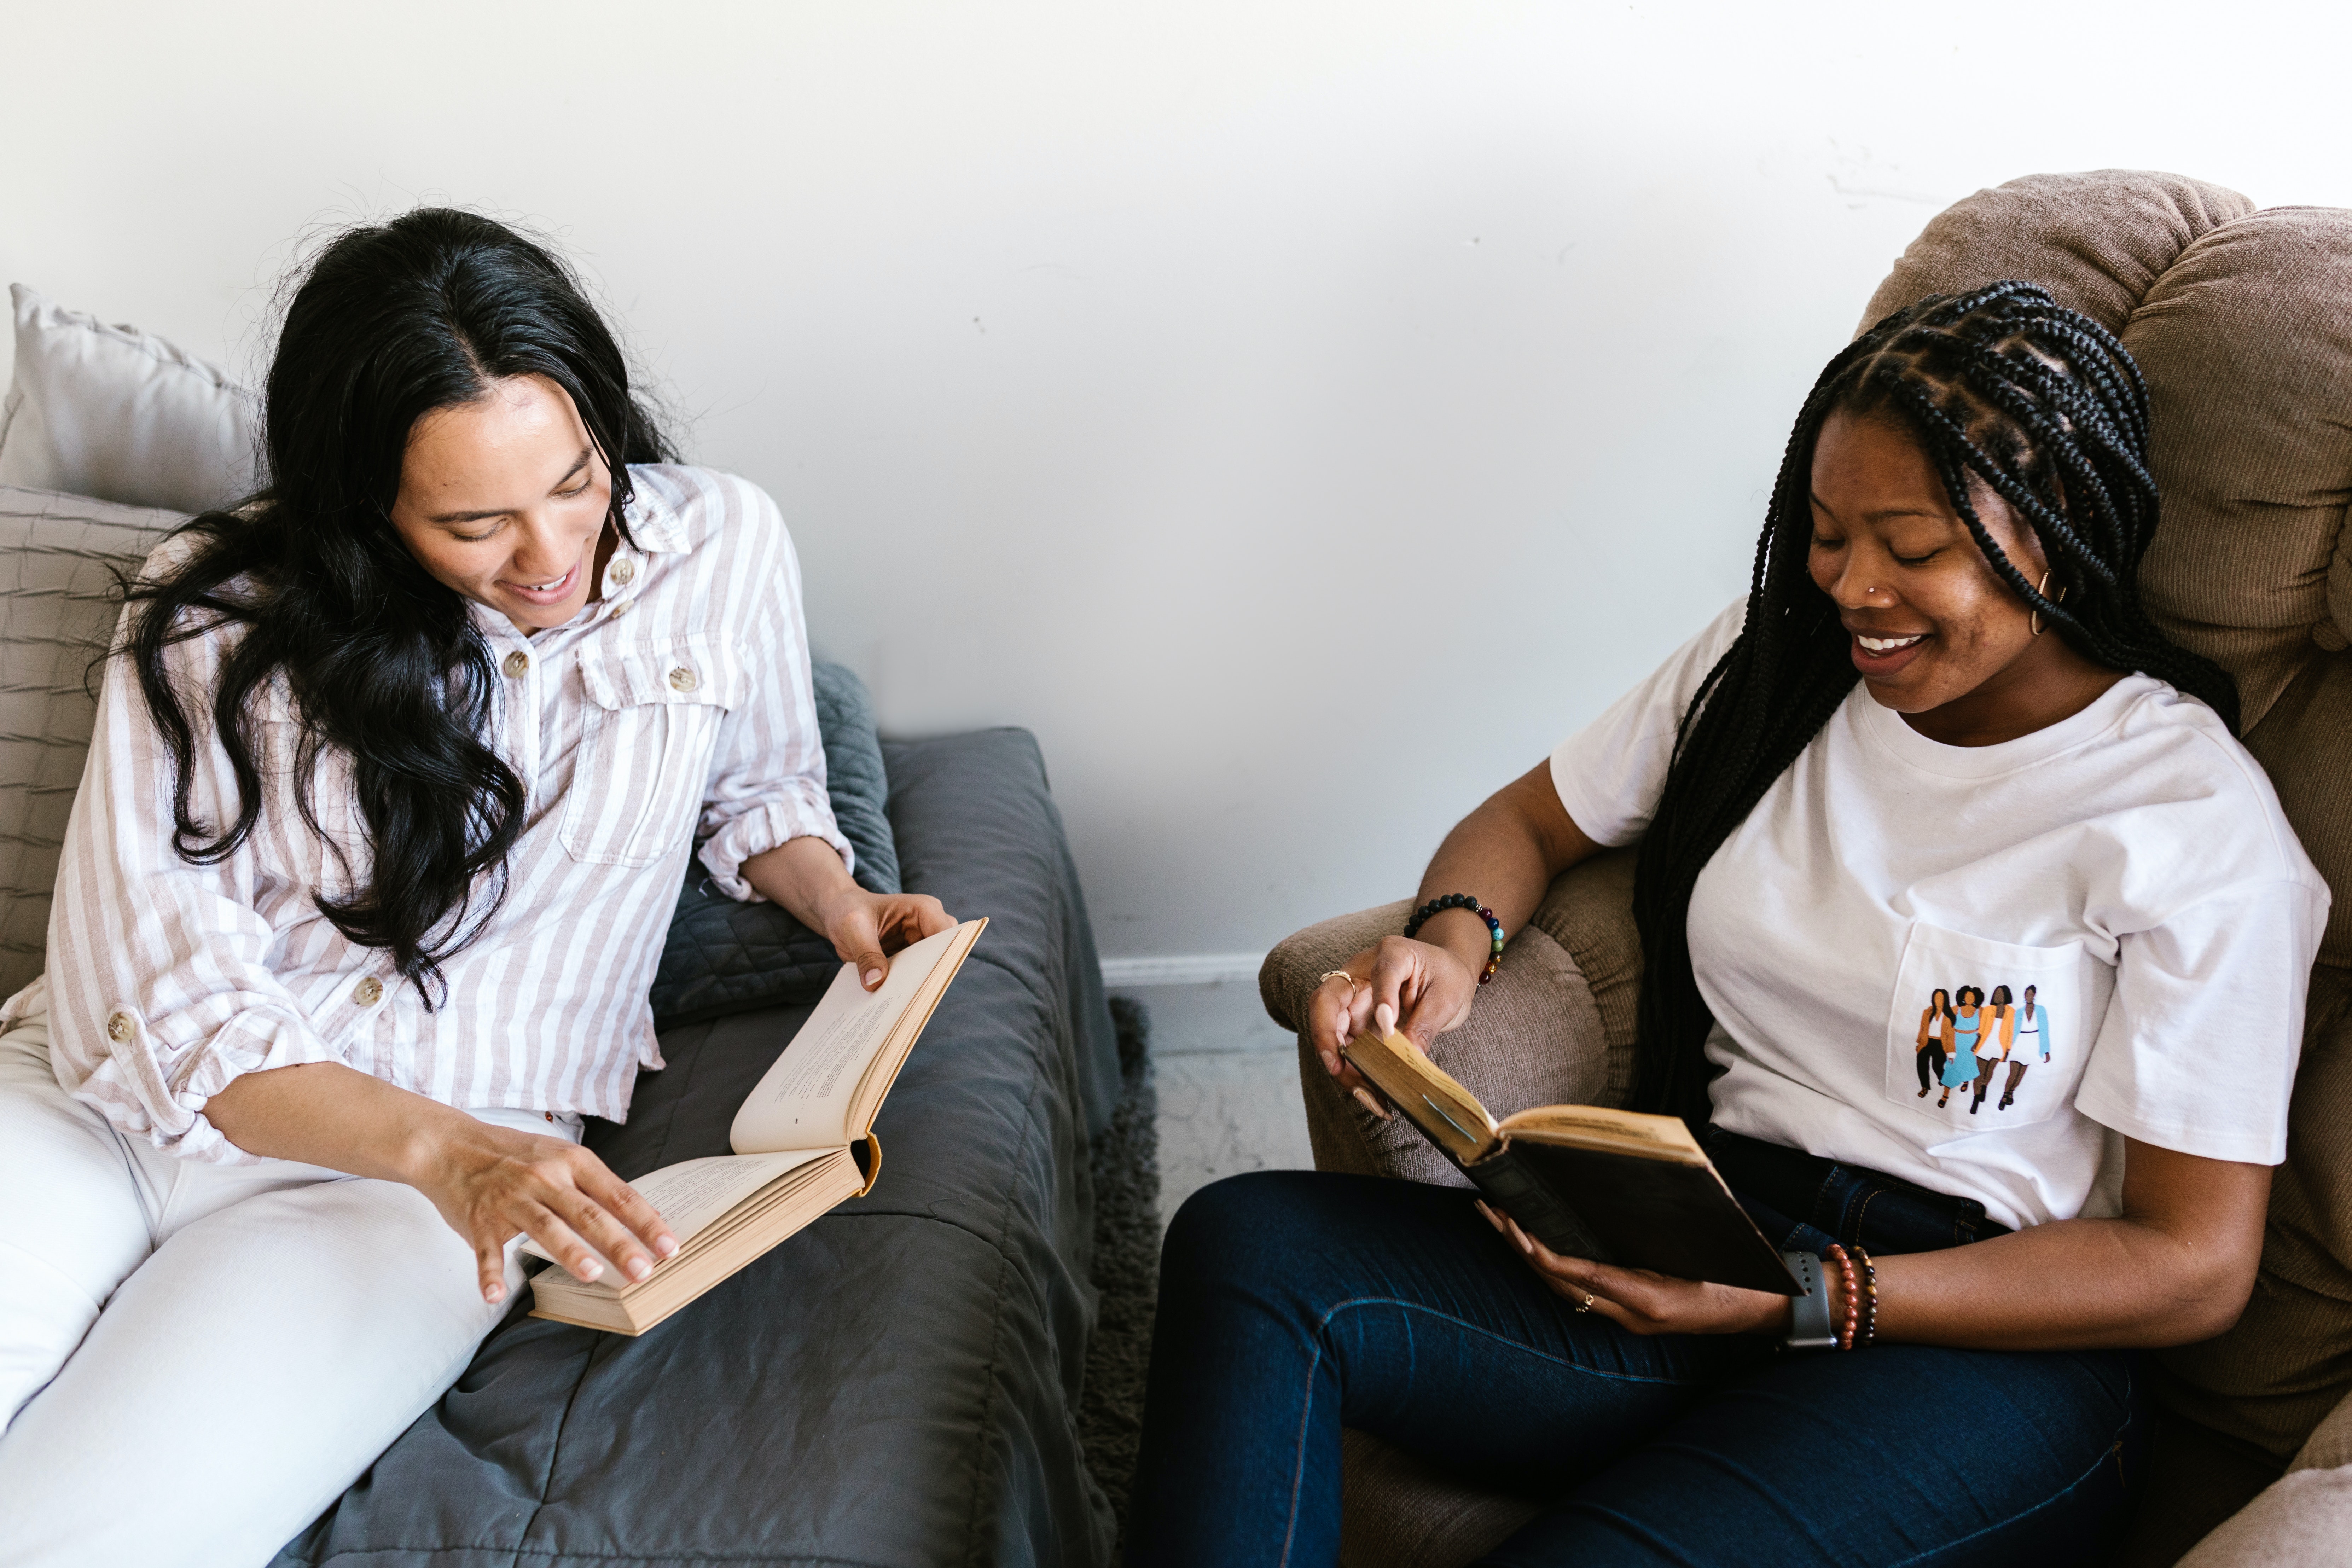 Two women sit together reading books.